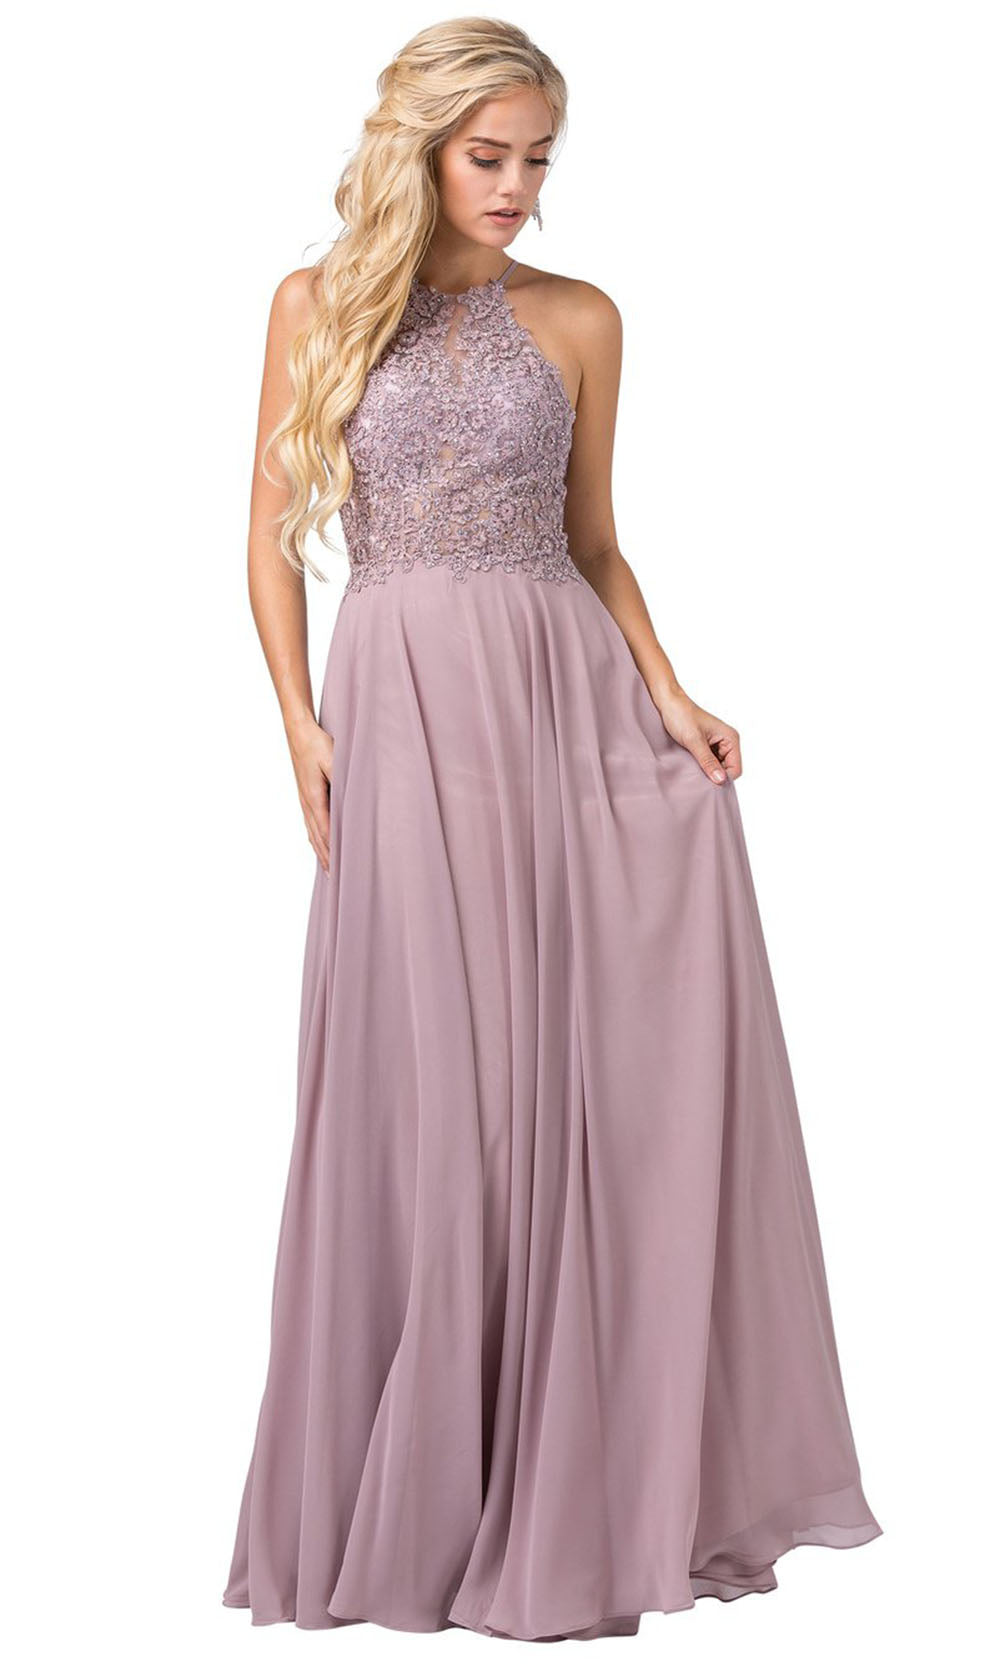 Dancing Queen - 2716 Embroidered Halter A-Line Dress In Pink